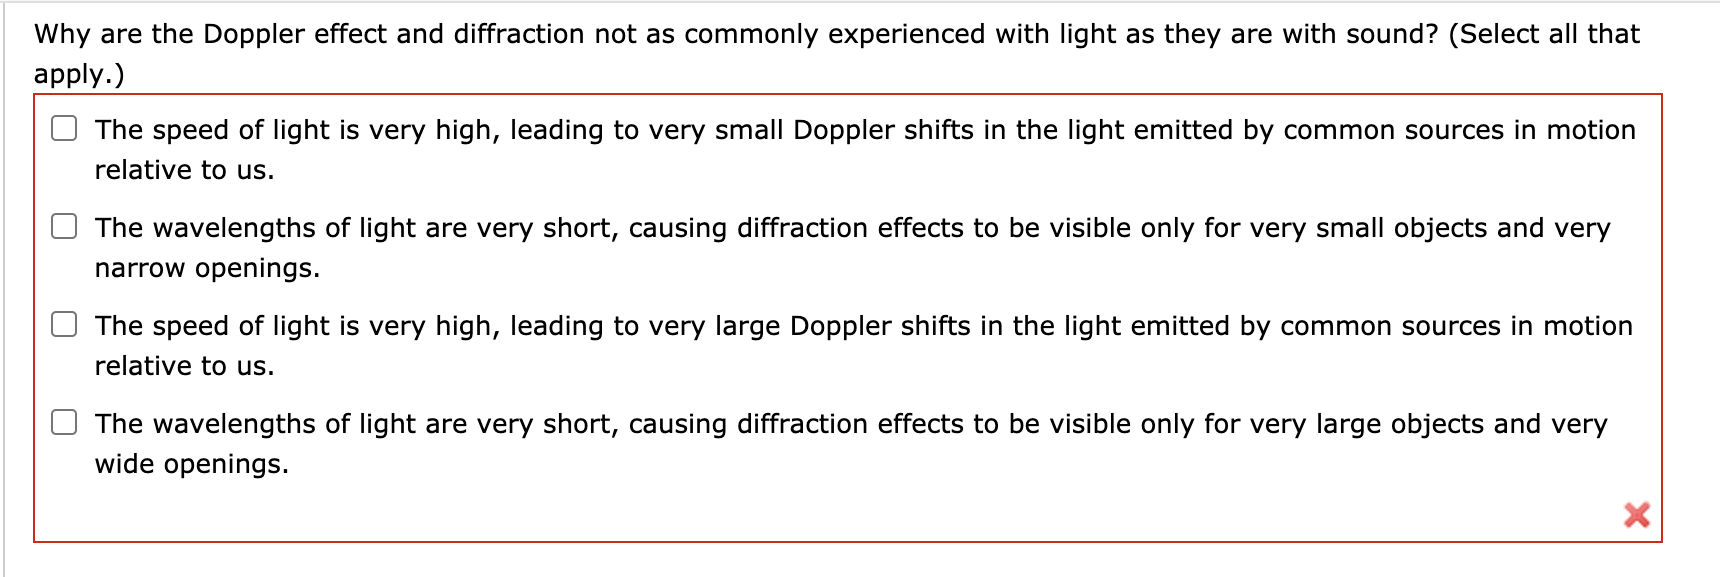 Why are the Doppler effect and diffraction not as commonly experienced with light as they are with sound? (Select all that
apply.)
The speed of light is very high, leading to very small Doppler shifts in the light emitted by common sources in motion
relative to us.
The wavelengths of light are very short, causing diffraction effects to be visible only for very small objects and very
narrow openings.
The speed of light is very high, leading to very large Doppler shifts in the light emitted by common sources in motion
relative to us.
The wavelengths of light are very short, causing diffraction effects to be visible only for very large objects and very
wide openings.
